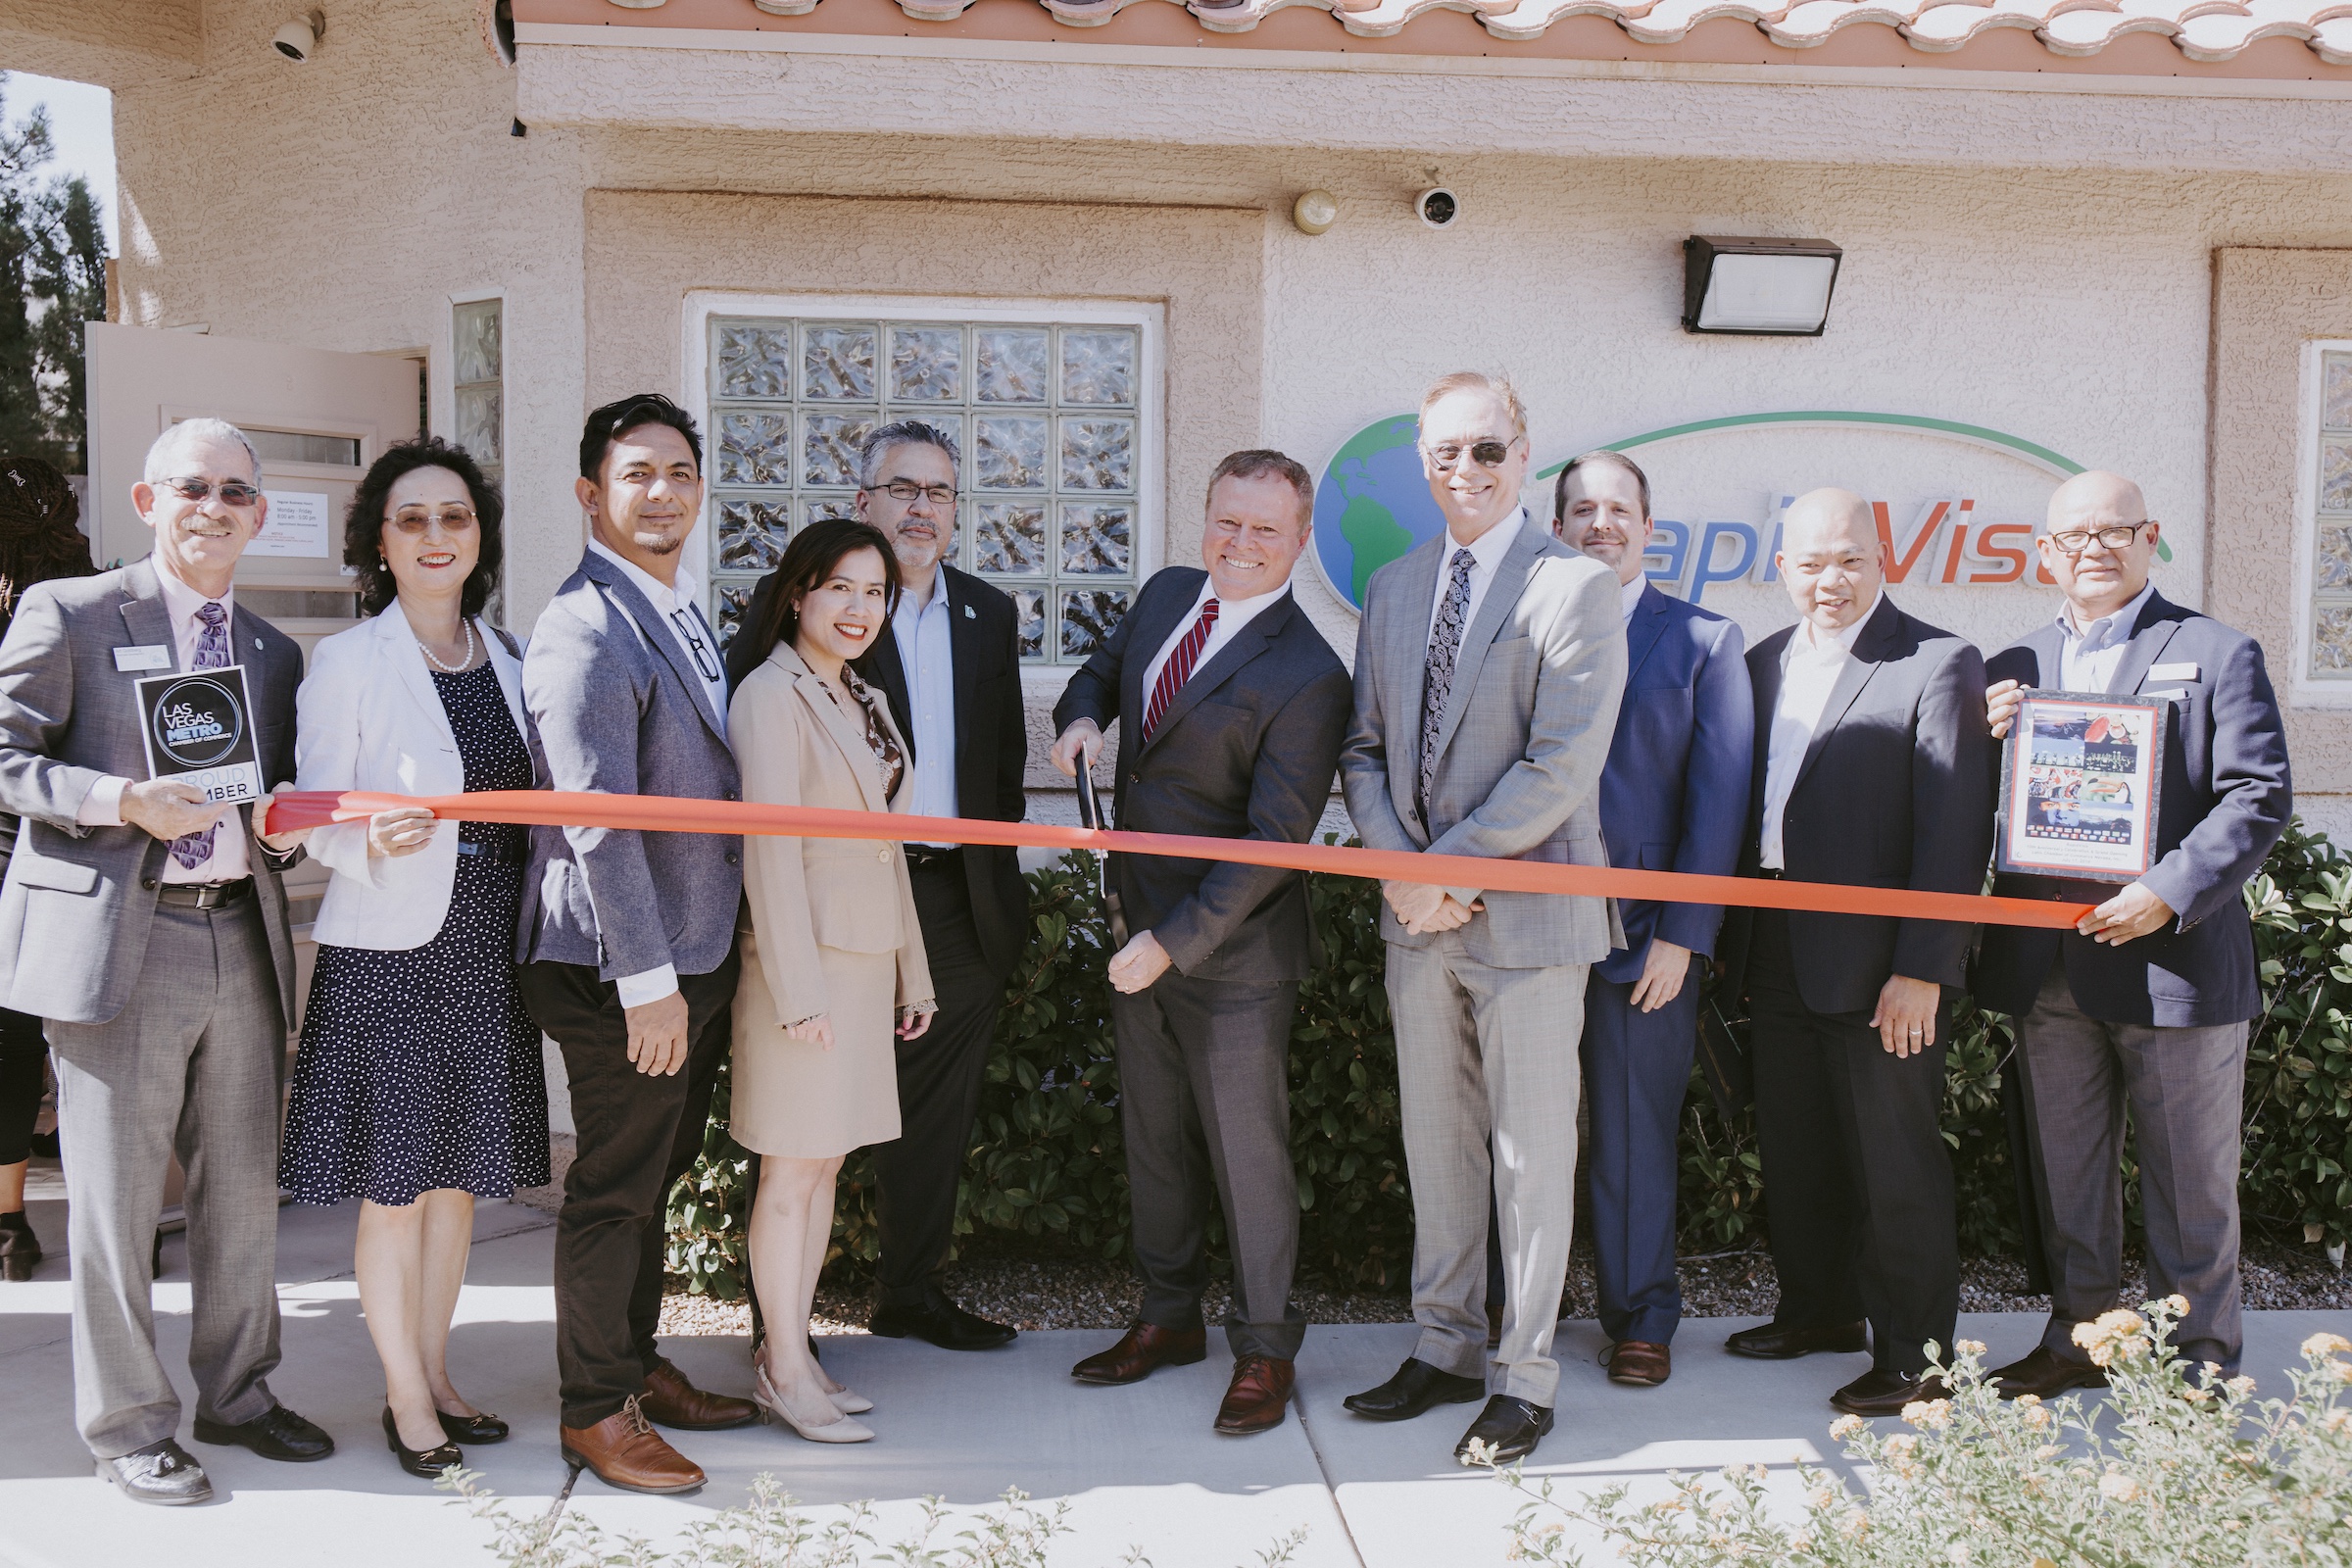 Ben Ives (center), flanked by RapidVisa Staff and members of the Las Vegas Metro, Asian, and Latin Chambers of Commerce attend a ribbon cutting ceremony during RapidVisa’s 10th anniversary and grand o